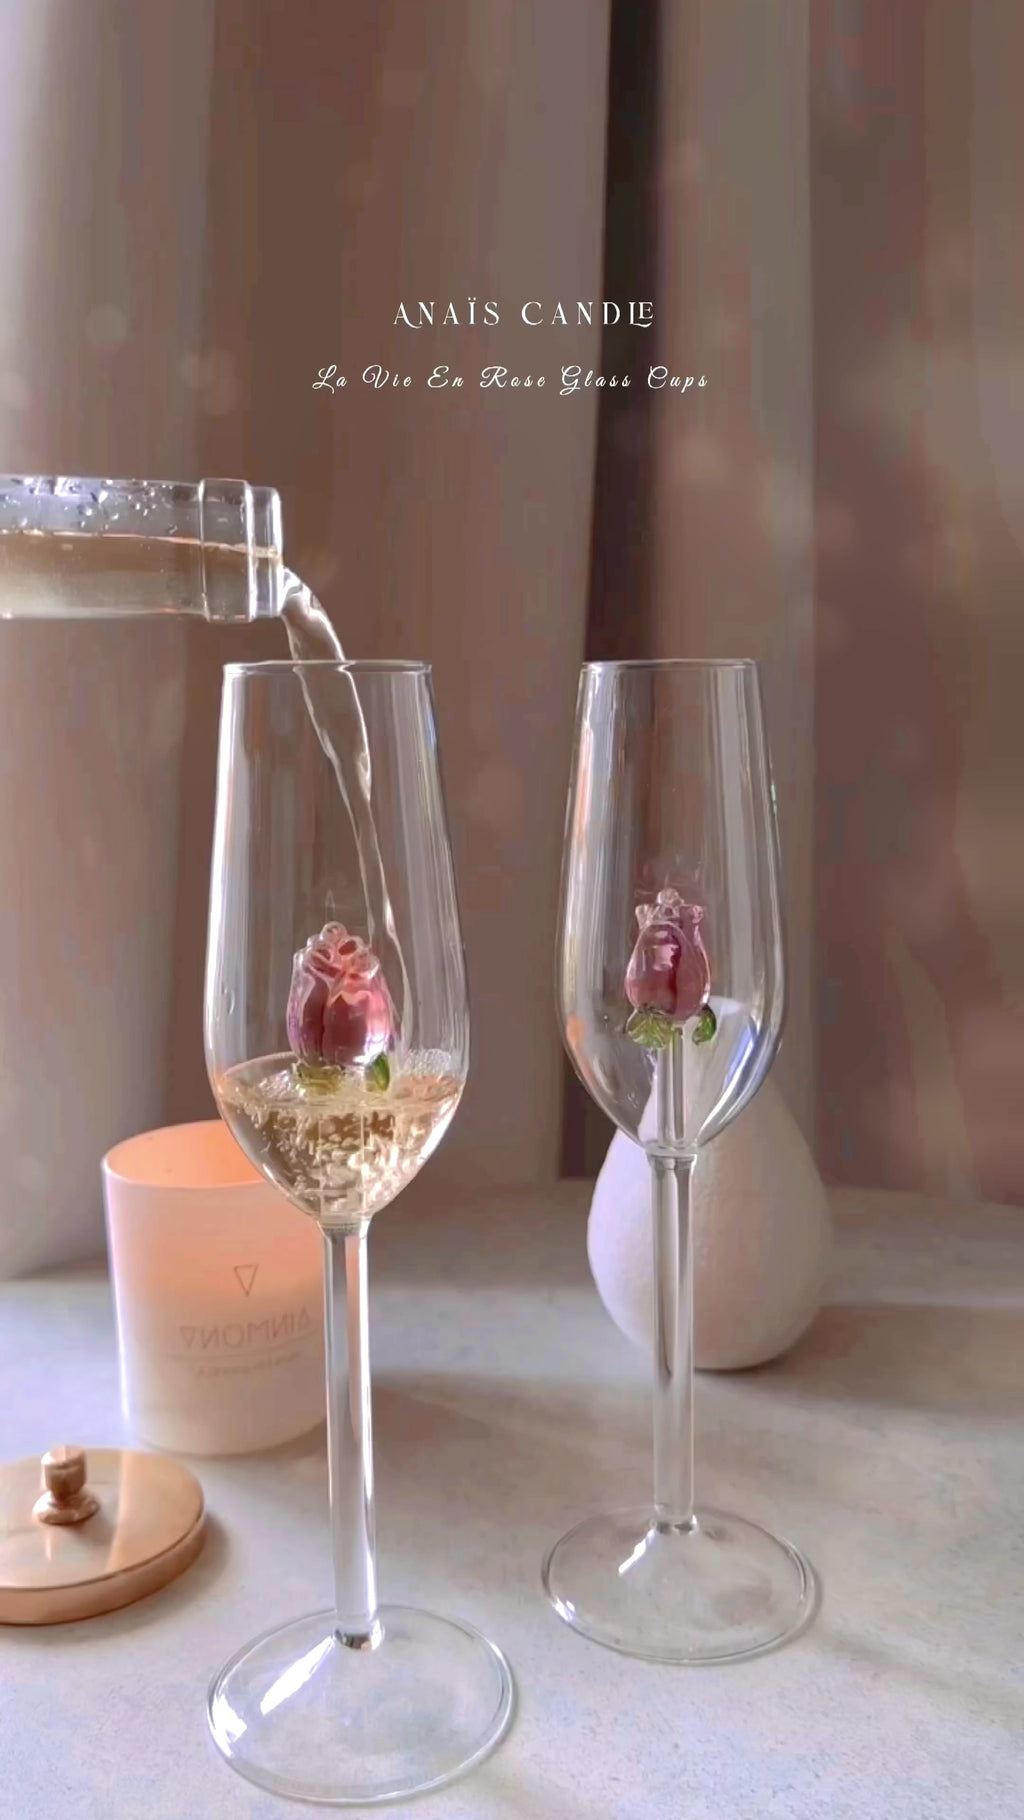 La Vie En Rose Champagne Glass Set of 2 - Handcrafted promotional video with bubbly champagne..